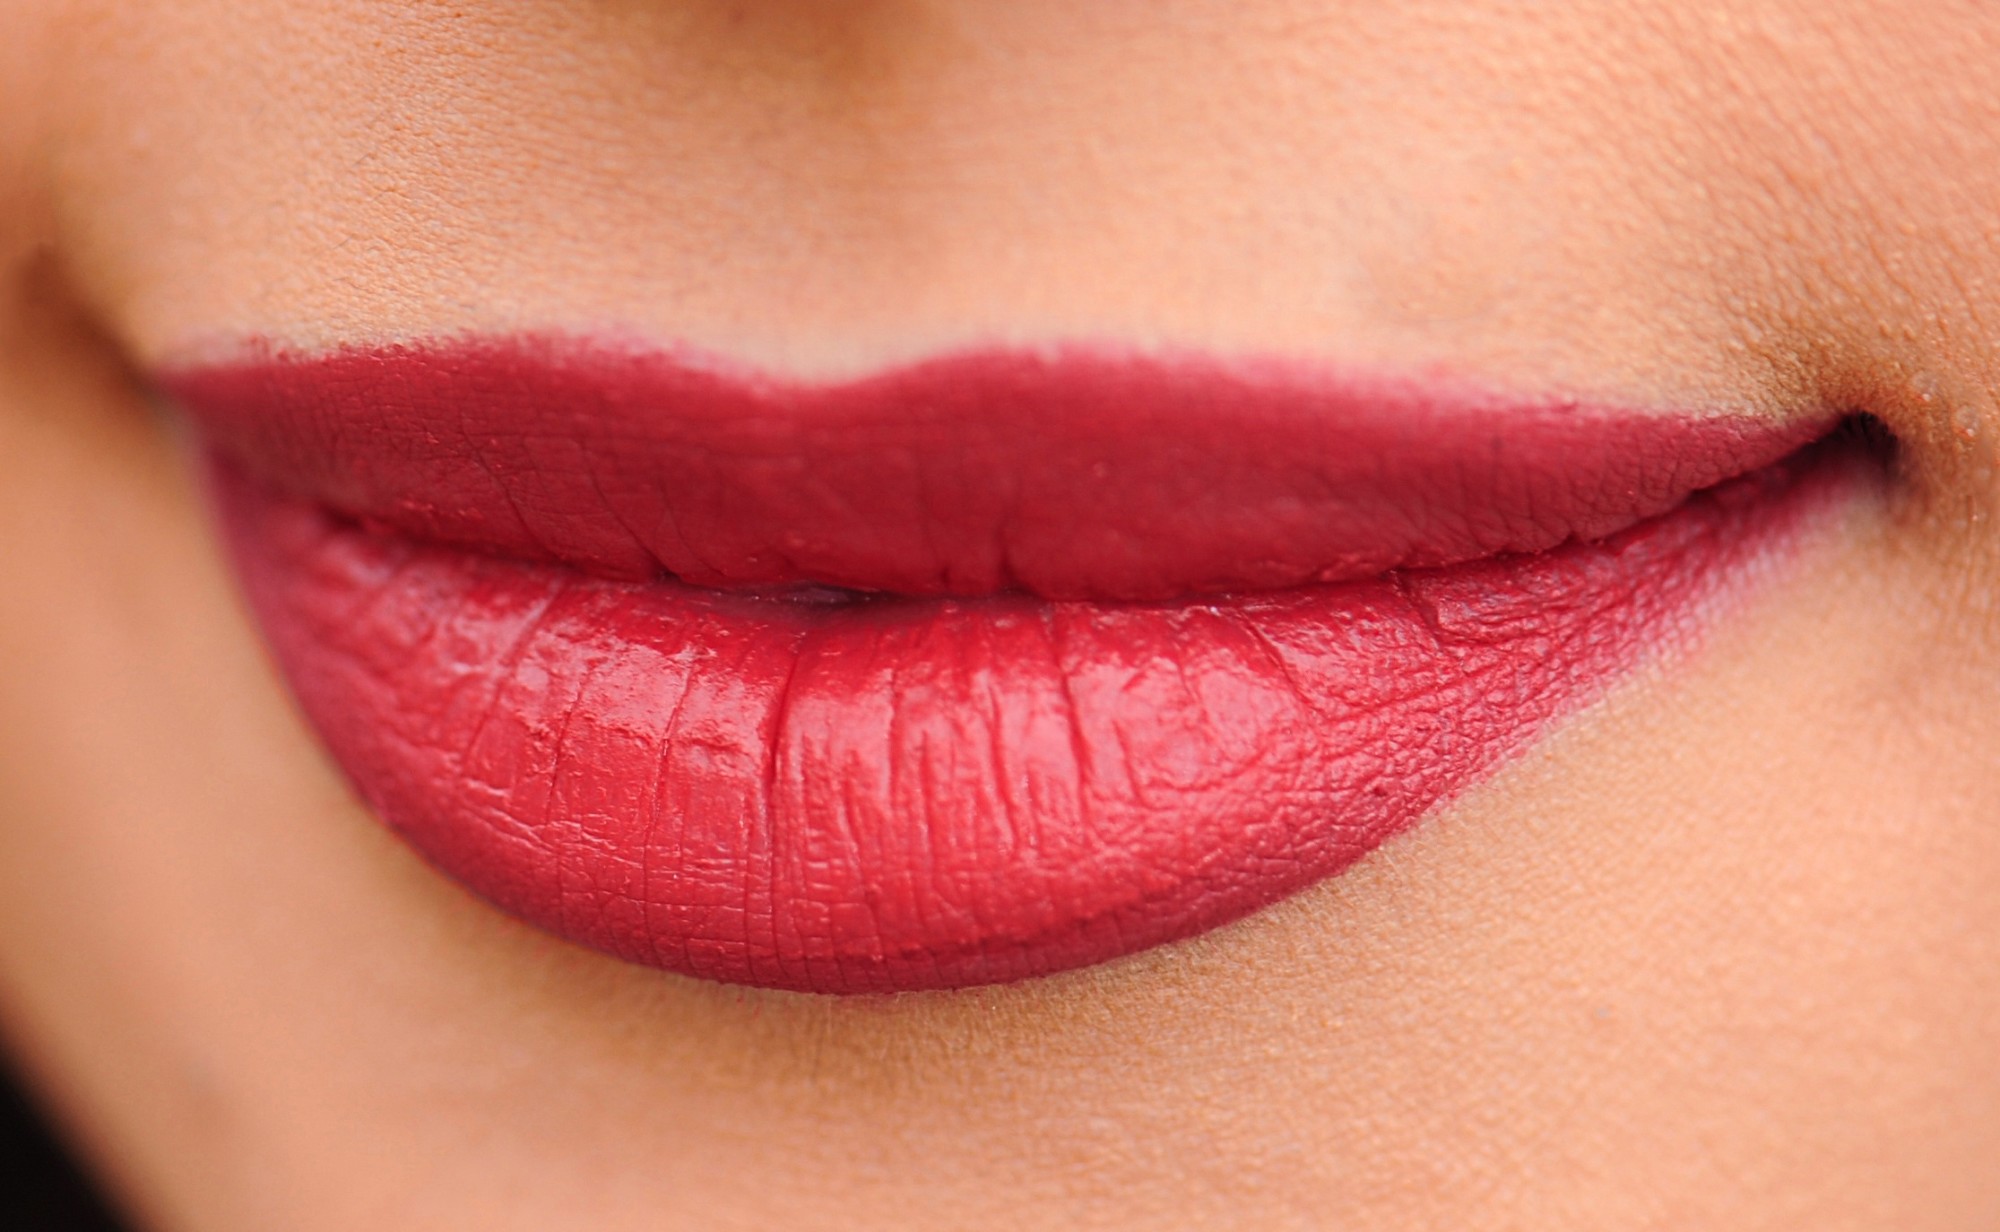 5 Things You Should Know About Lip Enhancement Treatments